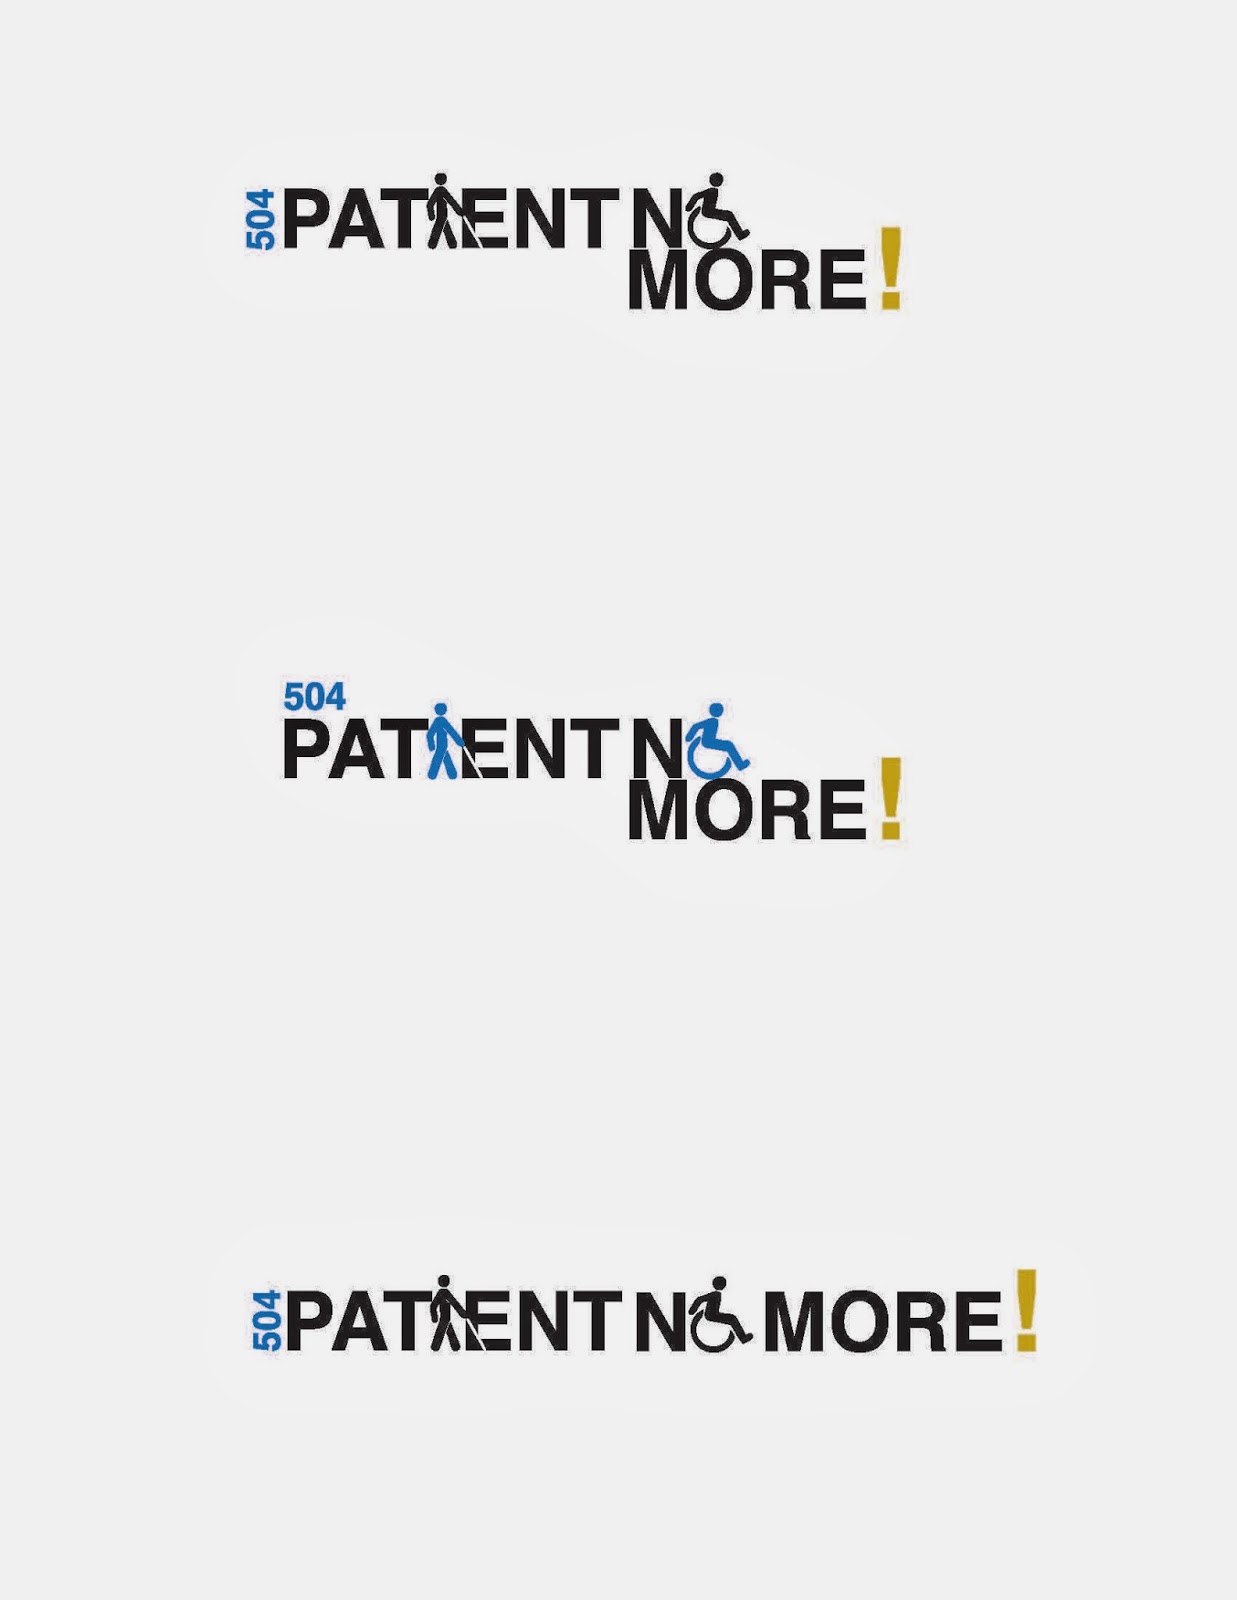 "Patient No More!" logo idea incorporating disability symbols as letterforms, color included